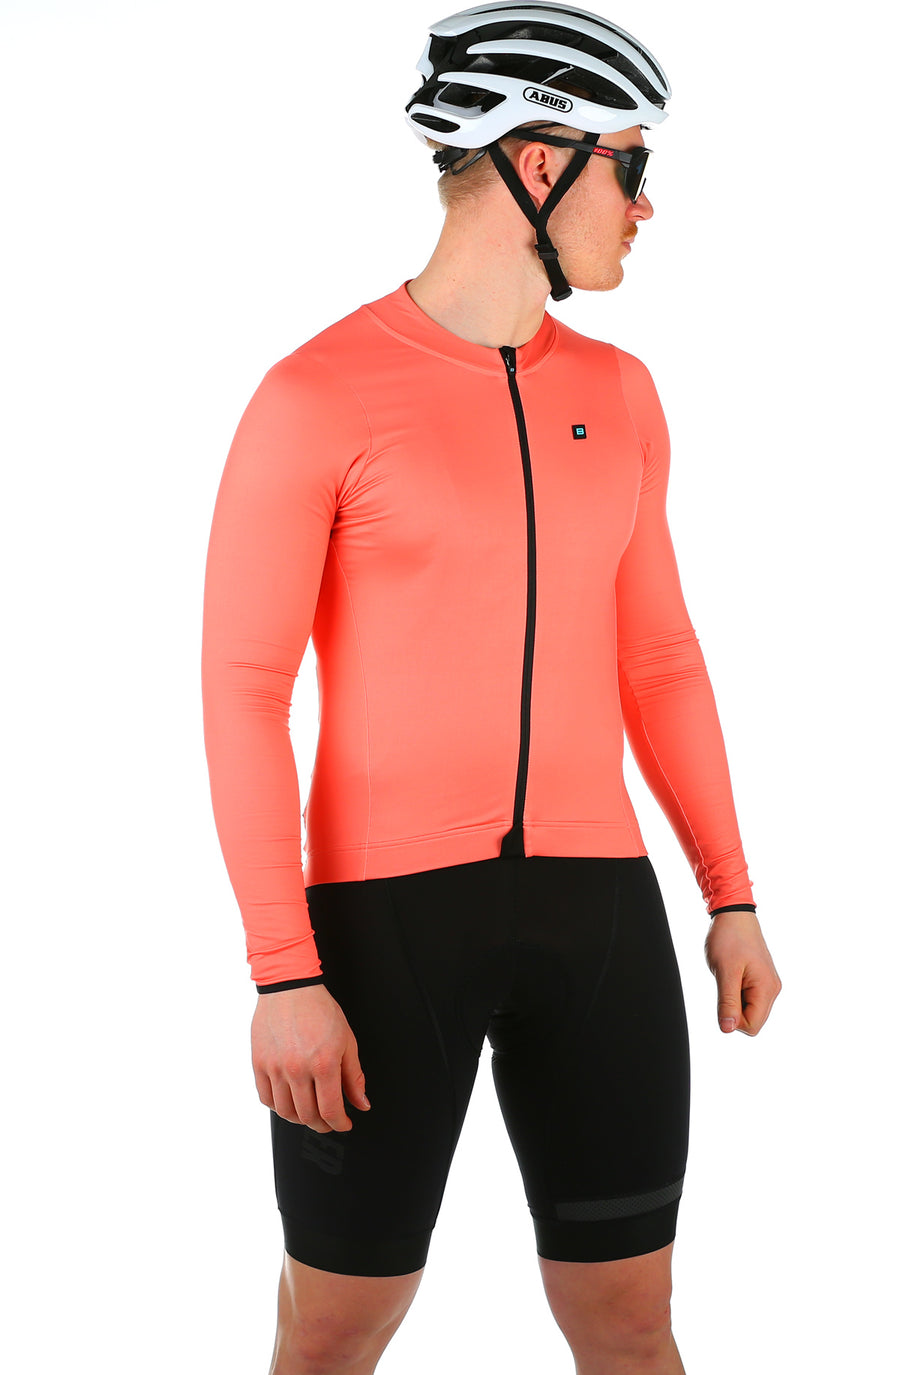 Biehler Signature Long Sleeve Jersey - Bright Coral